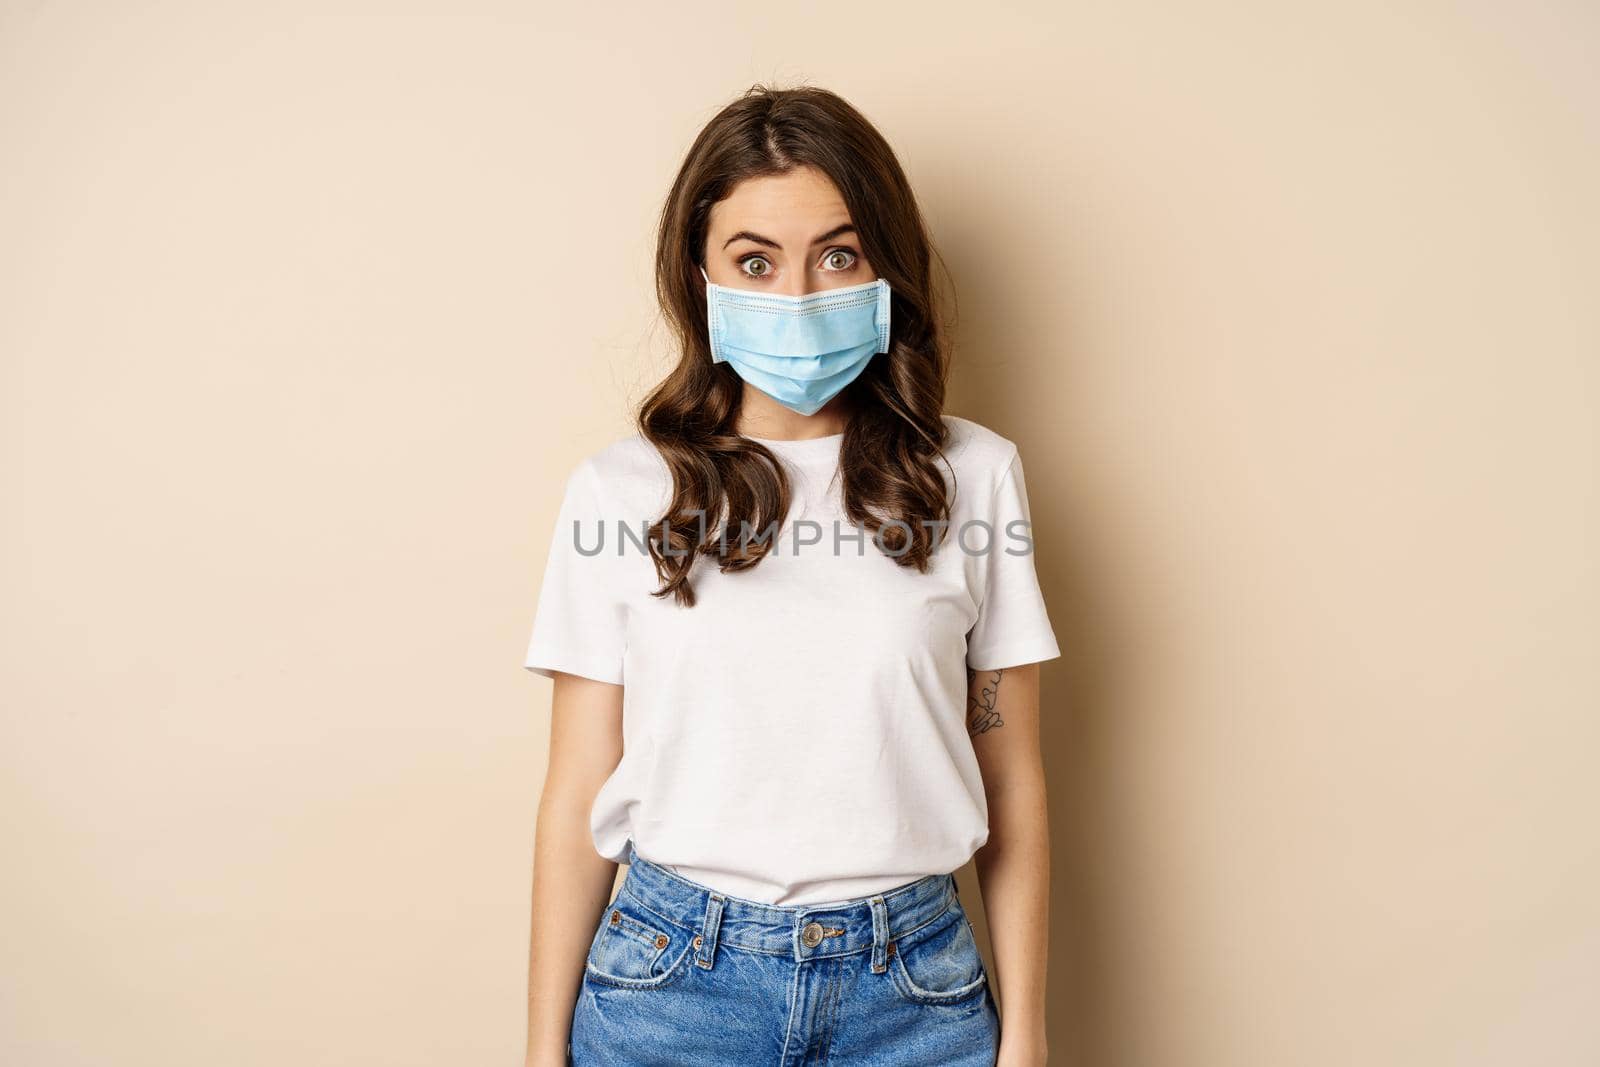 Covid-19 and people concept. Young woman in medical face mask and t-shirt, looking surprised at camera, eyes in disbelief, standing over beige background.